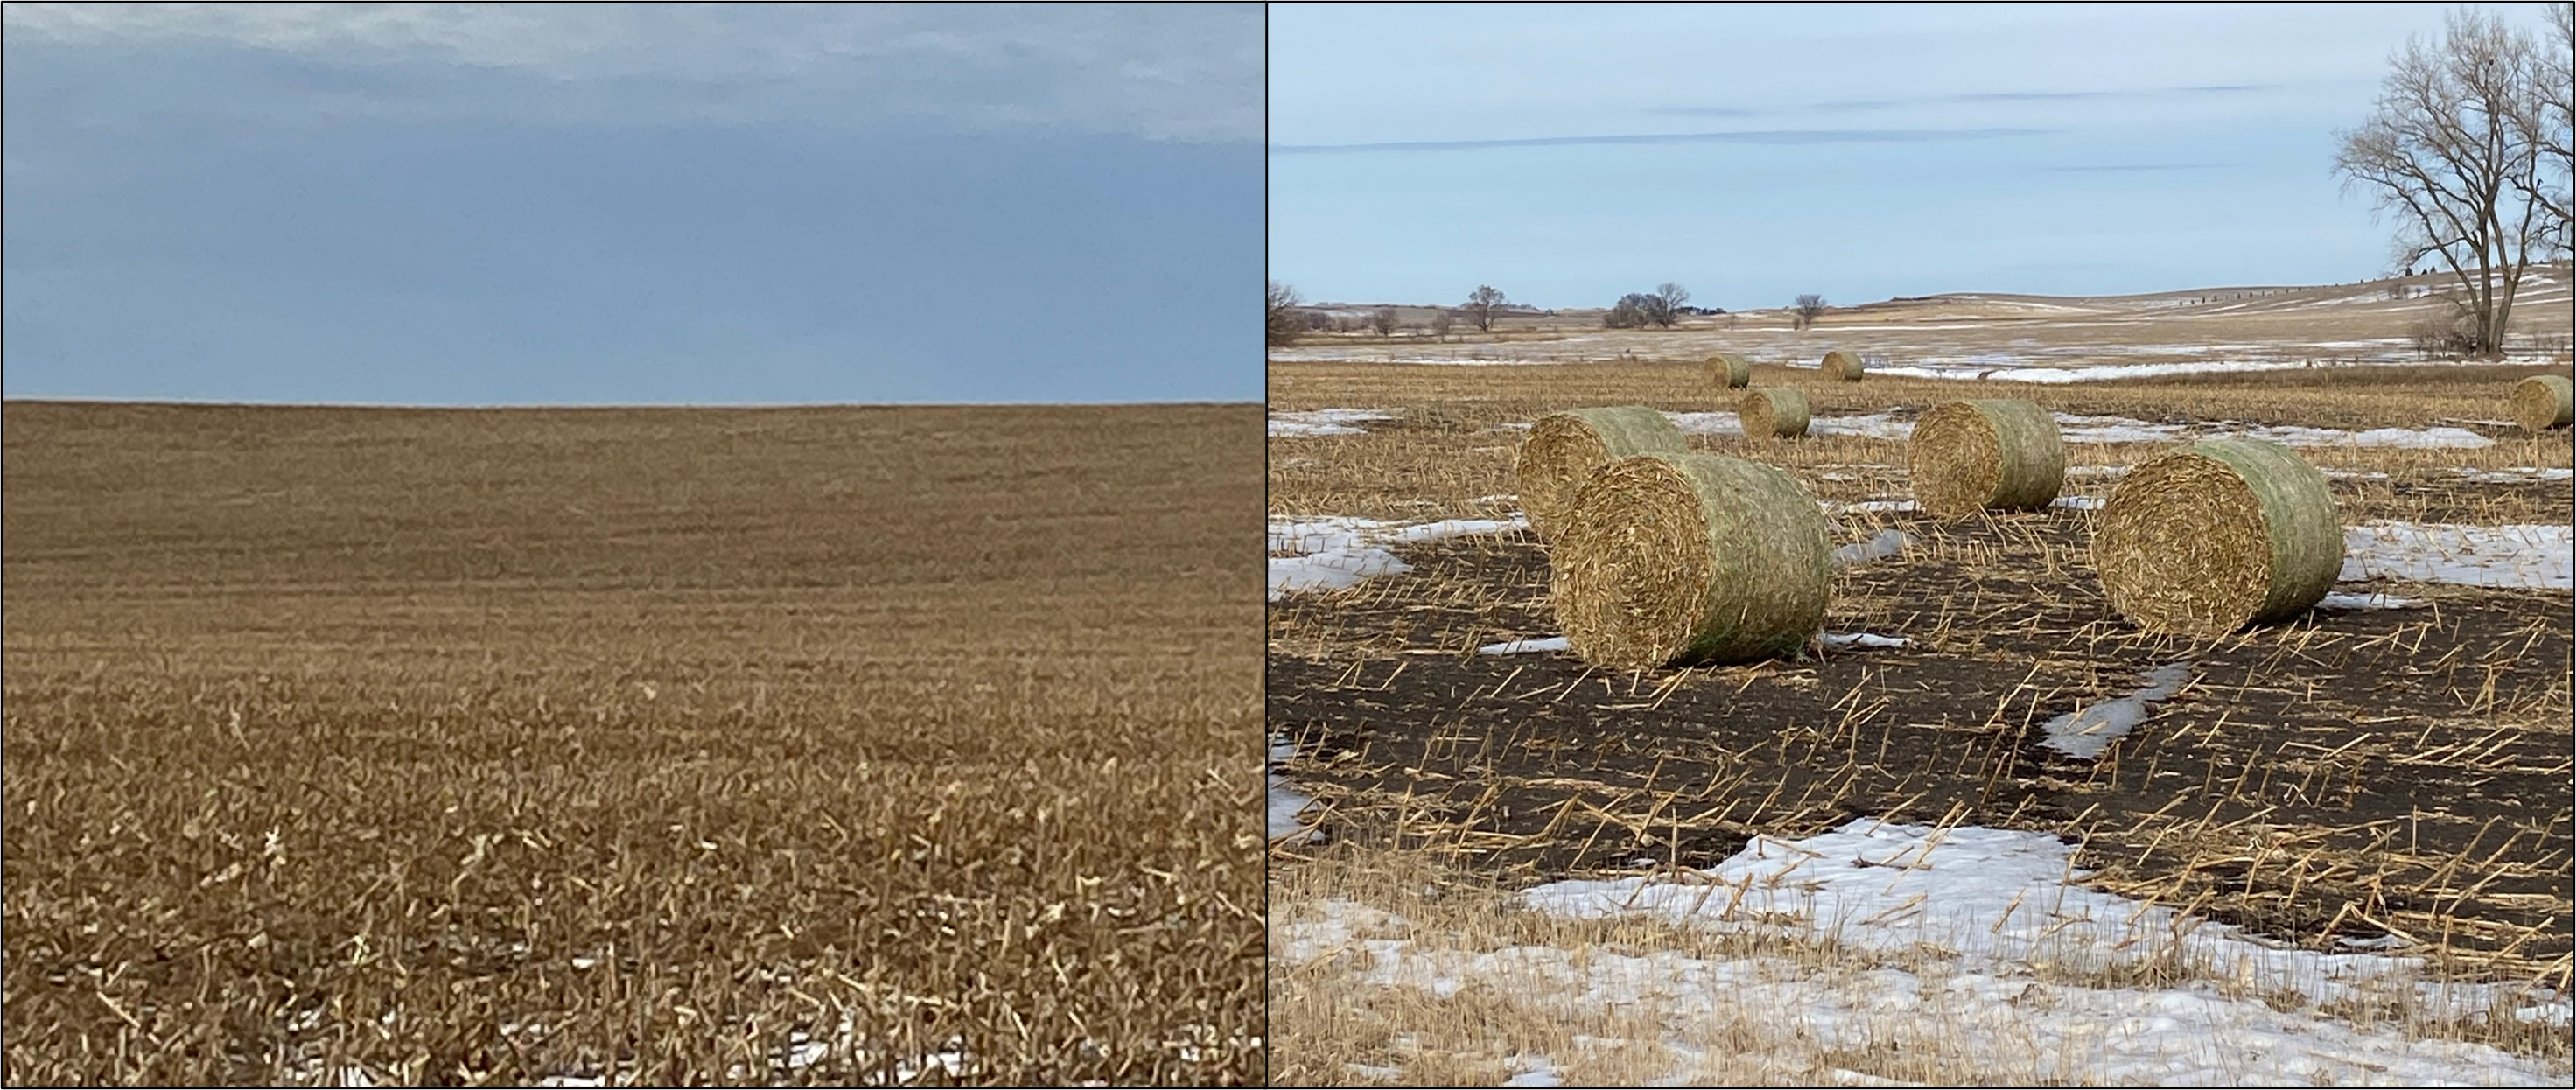 Corn field prior to baling residues (left) and field stripped by baling corn stalk residues (right).